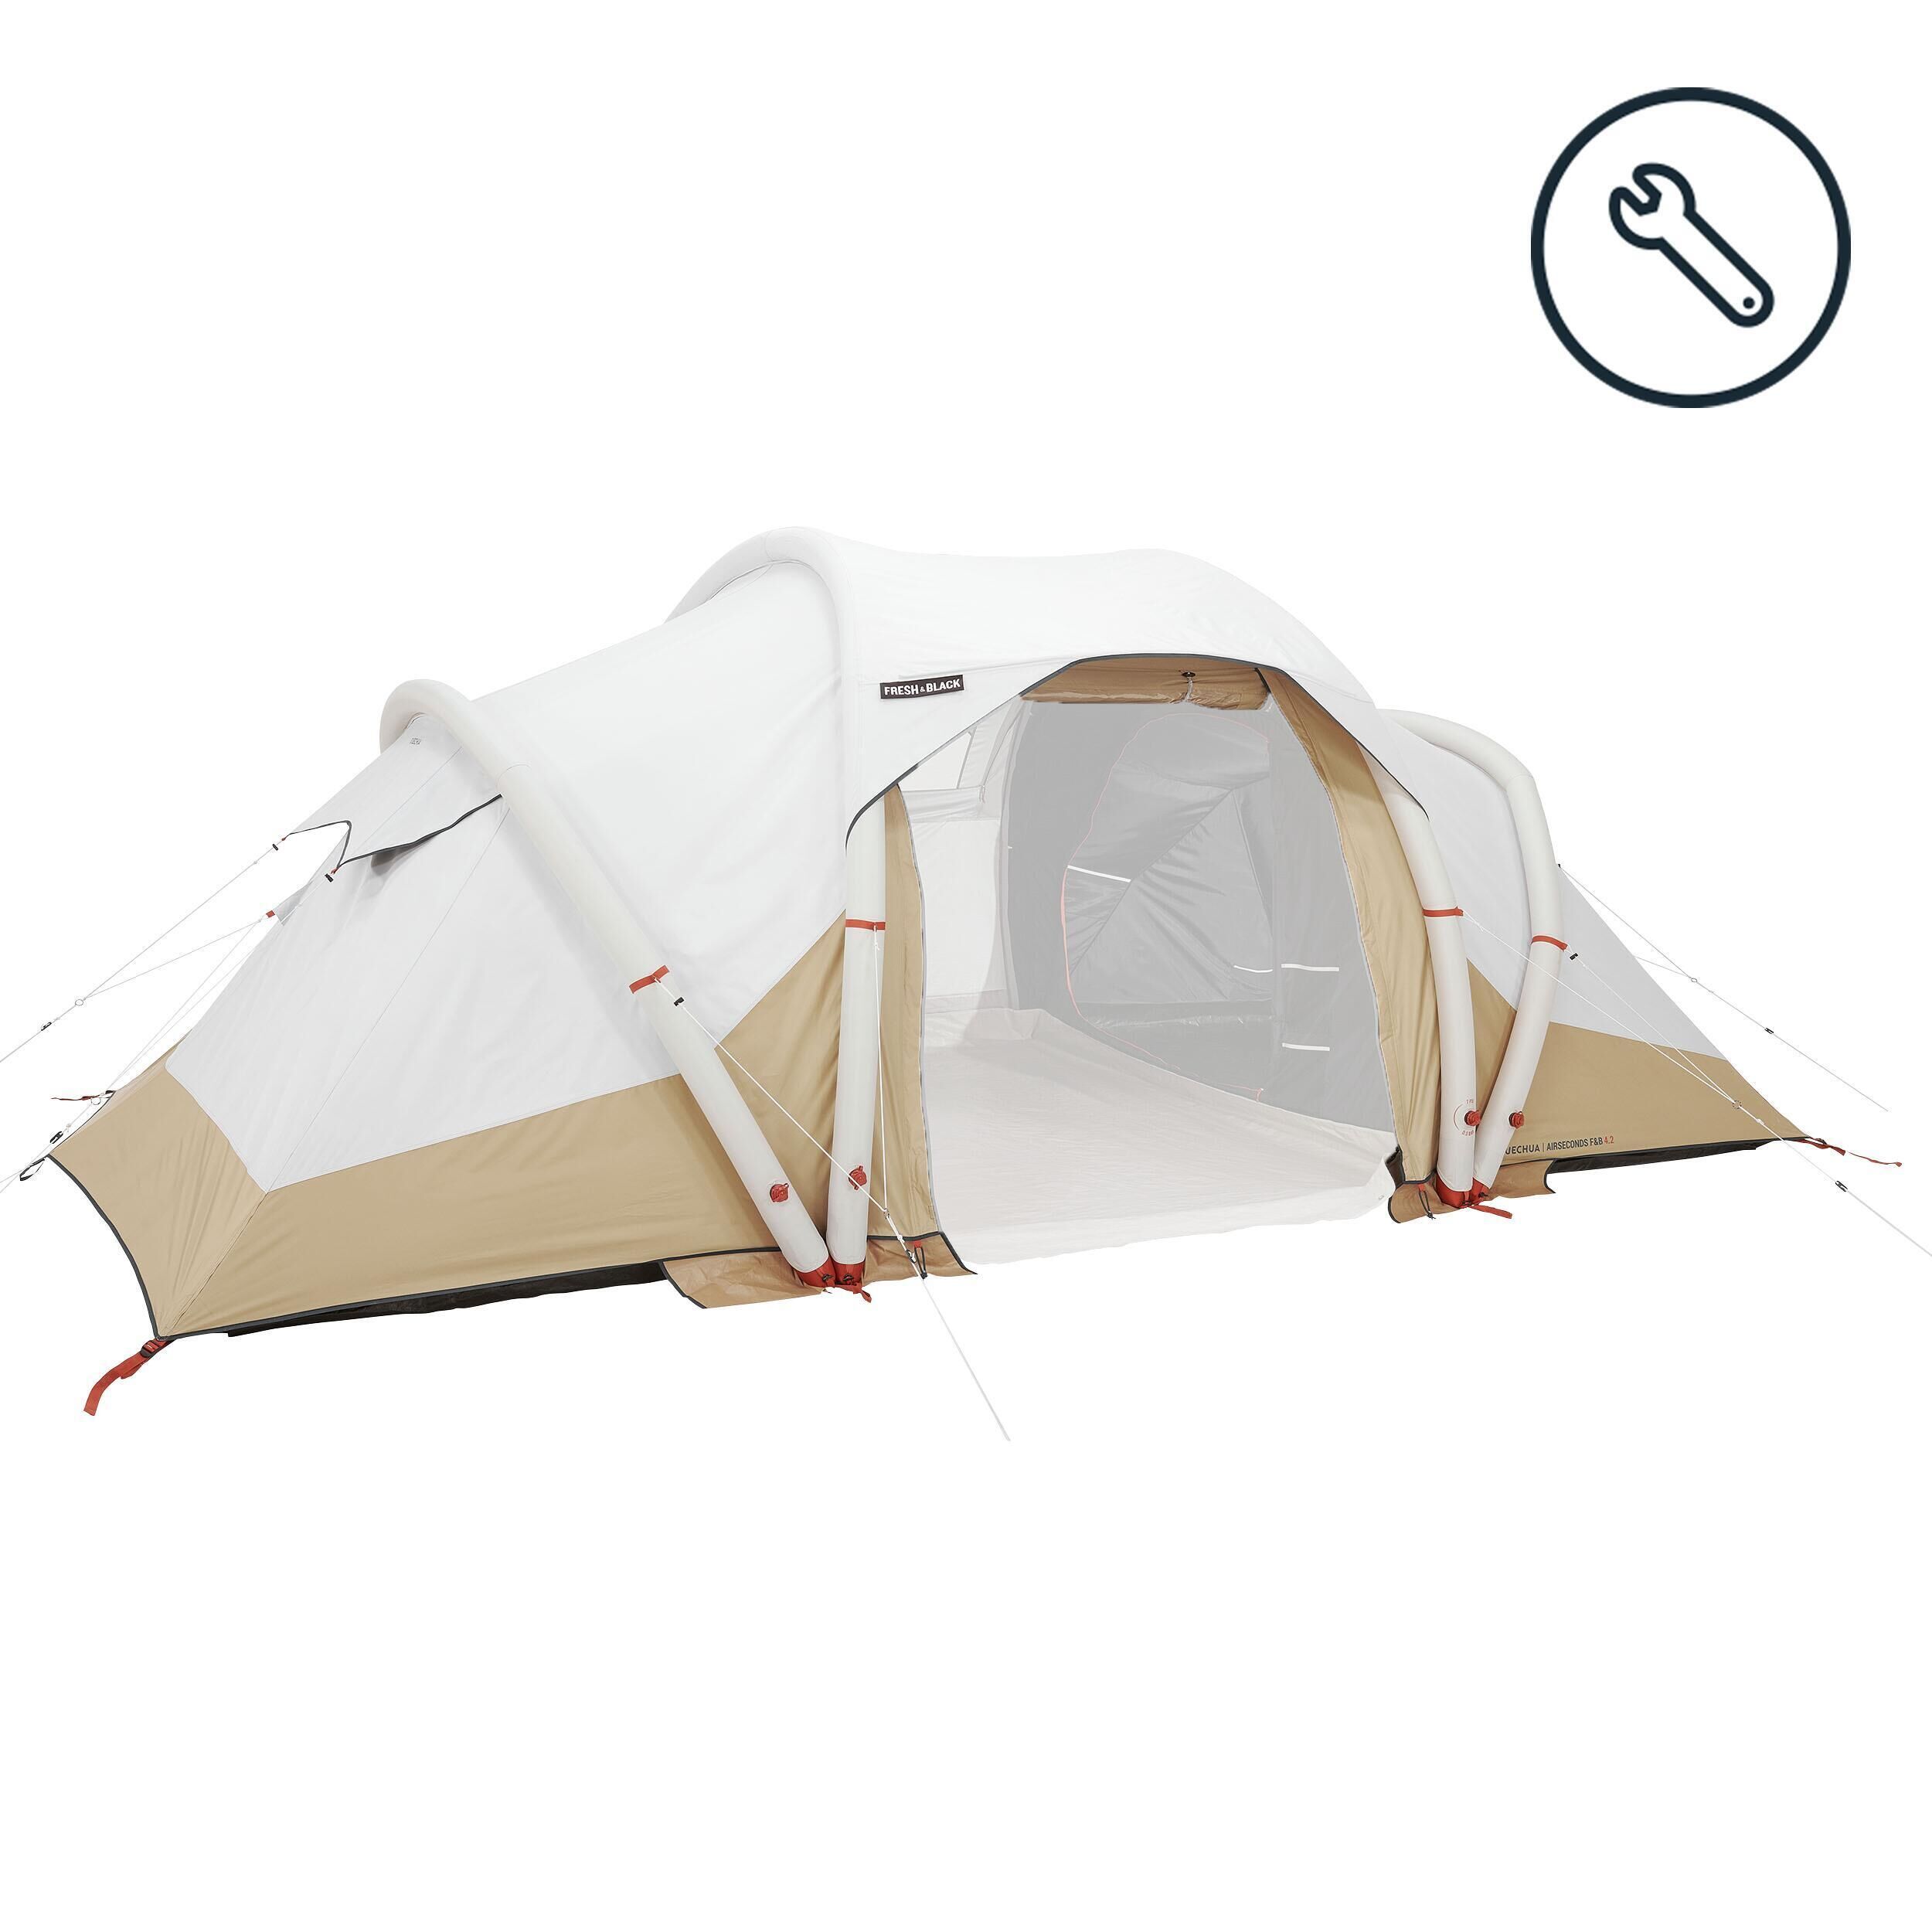 QUECHUA REFURBISHED FLYSHEET - SPARE PART FOR THE AIR SECONDS 4.2 TENT-A GRADE